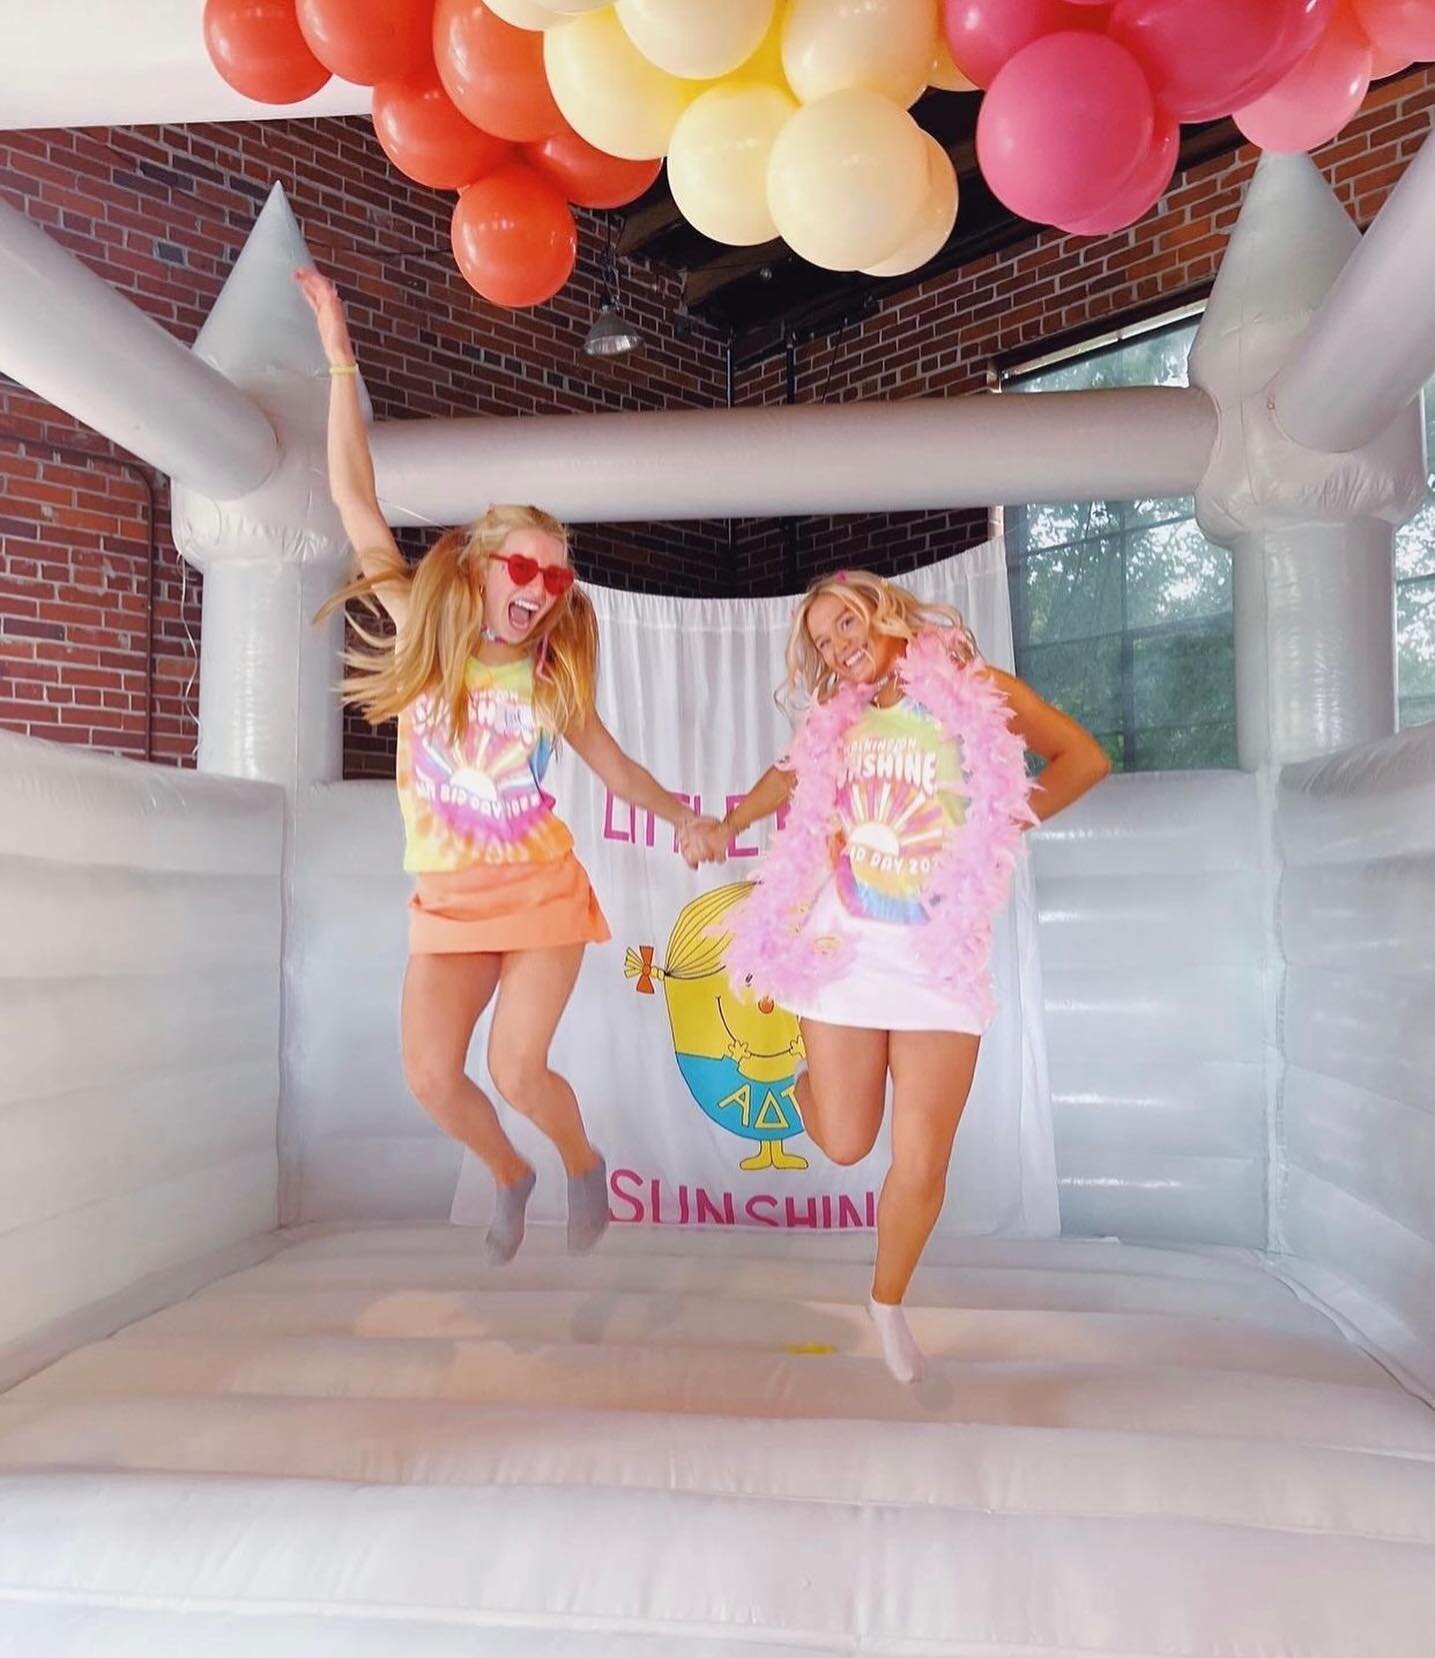 Walking on sunshine with @adpisouthcarolina last week was a lot of fun ☀️ 

🎈: @mommyeastcoast 
📍: @senatesend 

#bidday #colabouncehouse #thecolabouncehouse #columbiascbouncehouse #colascbouncehouse #whitebouncehouse #columbiasouthcarolina #uofsc 